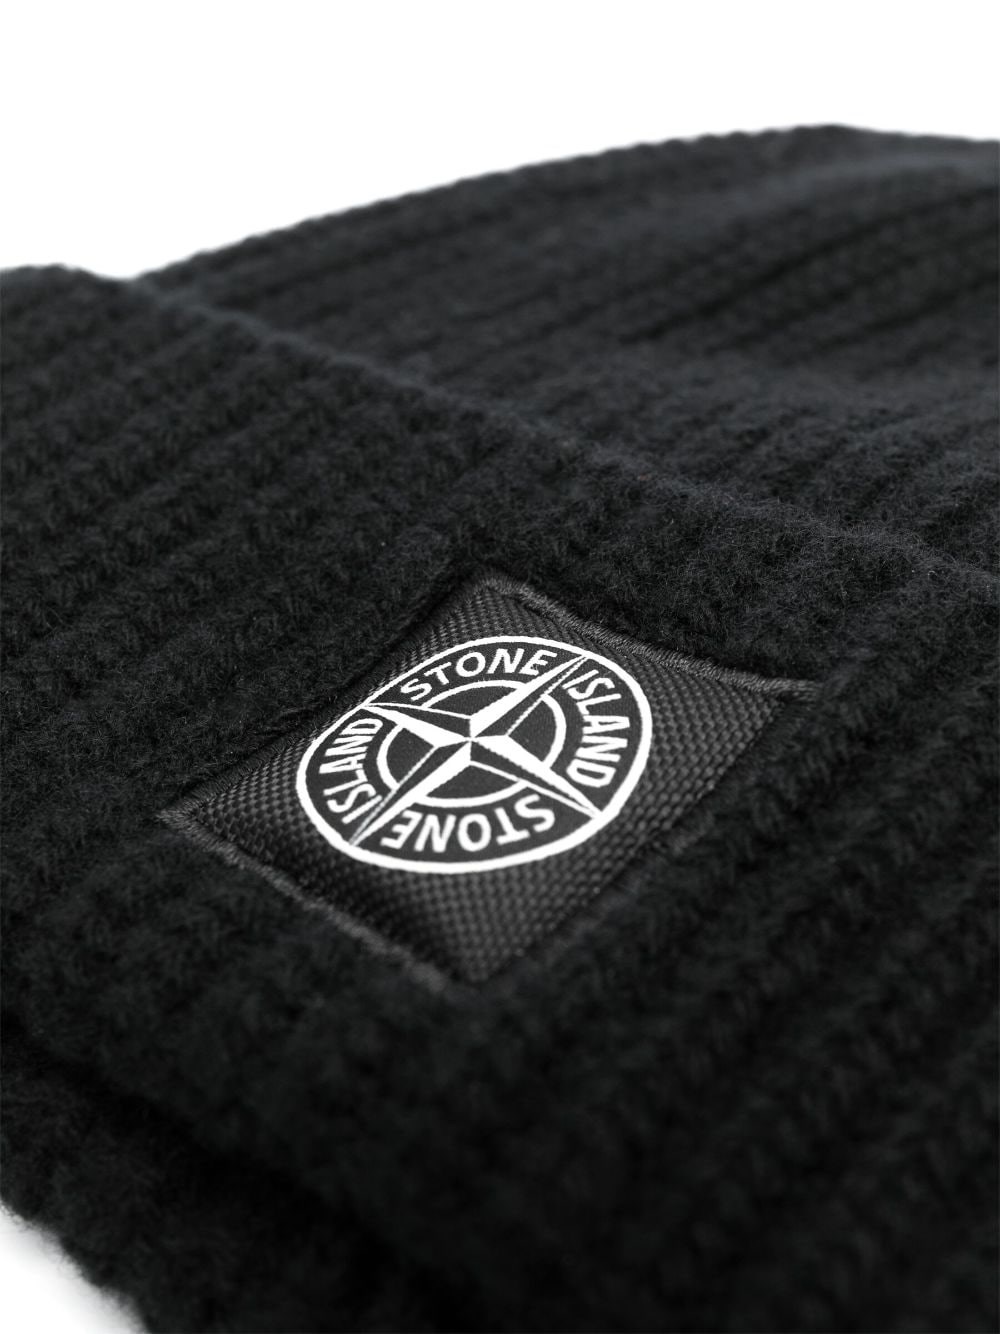 stone island BEANIE HAT available on montiboutique.com - 56254